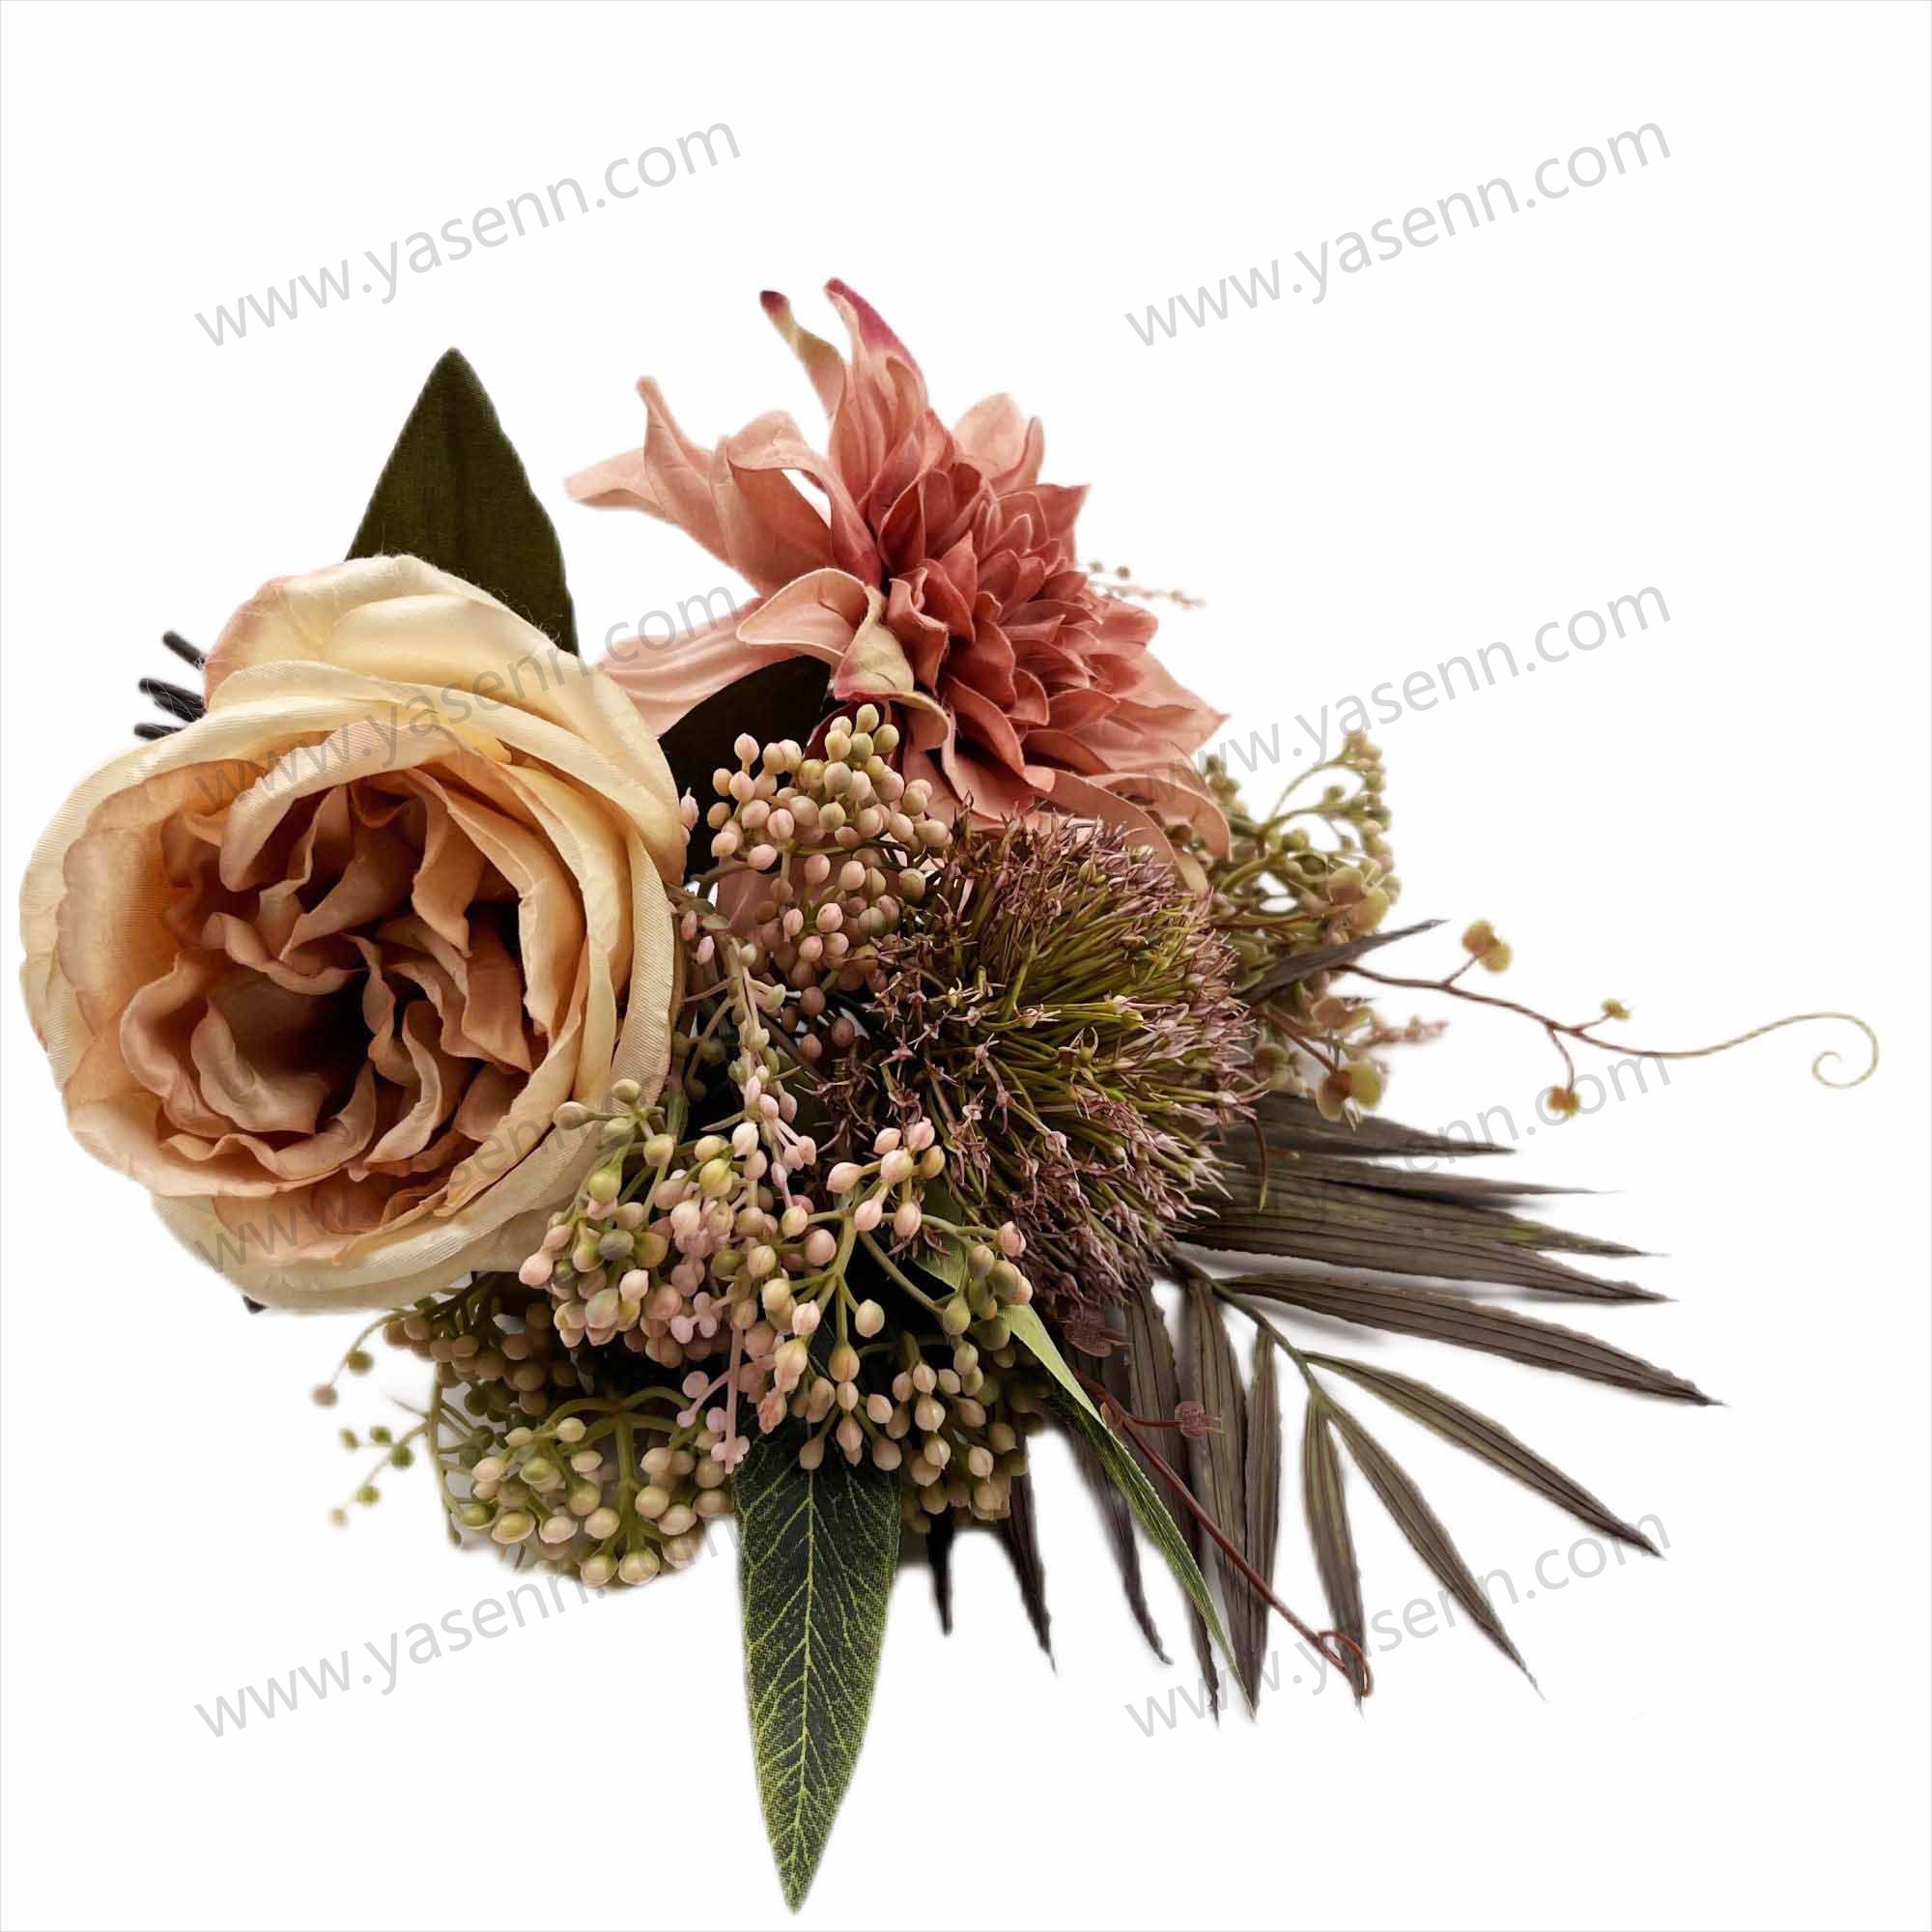 7 BRANCHES PEONY CHRYSANTHEMUM bridal bouquet artificial flowers YSB23181